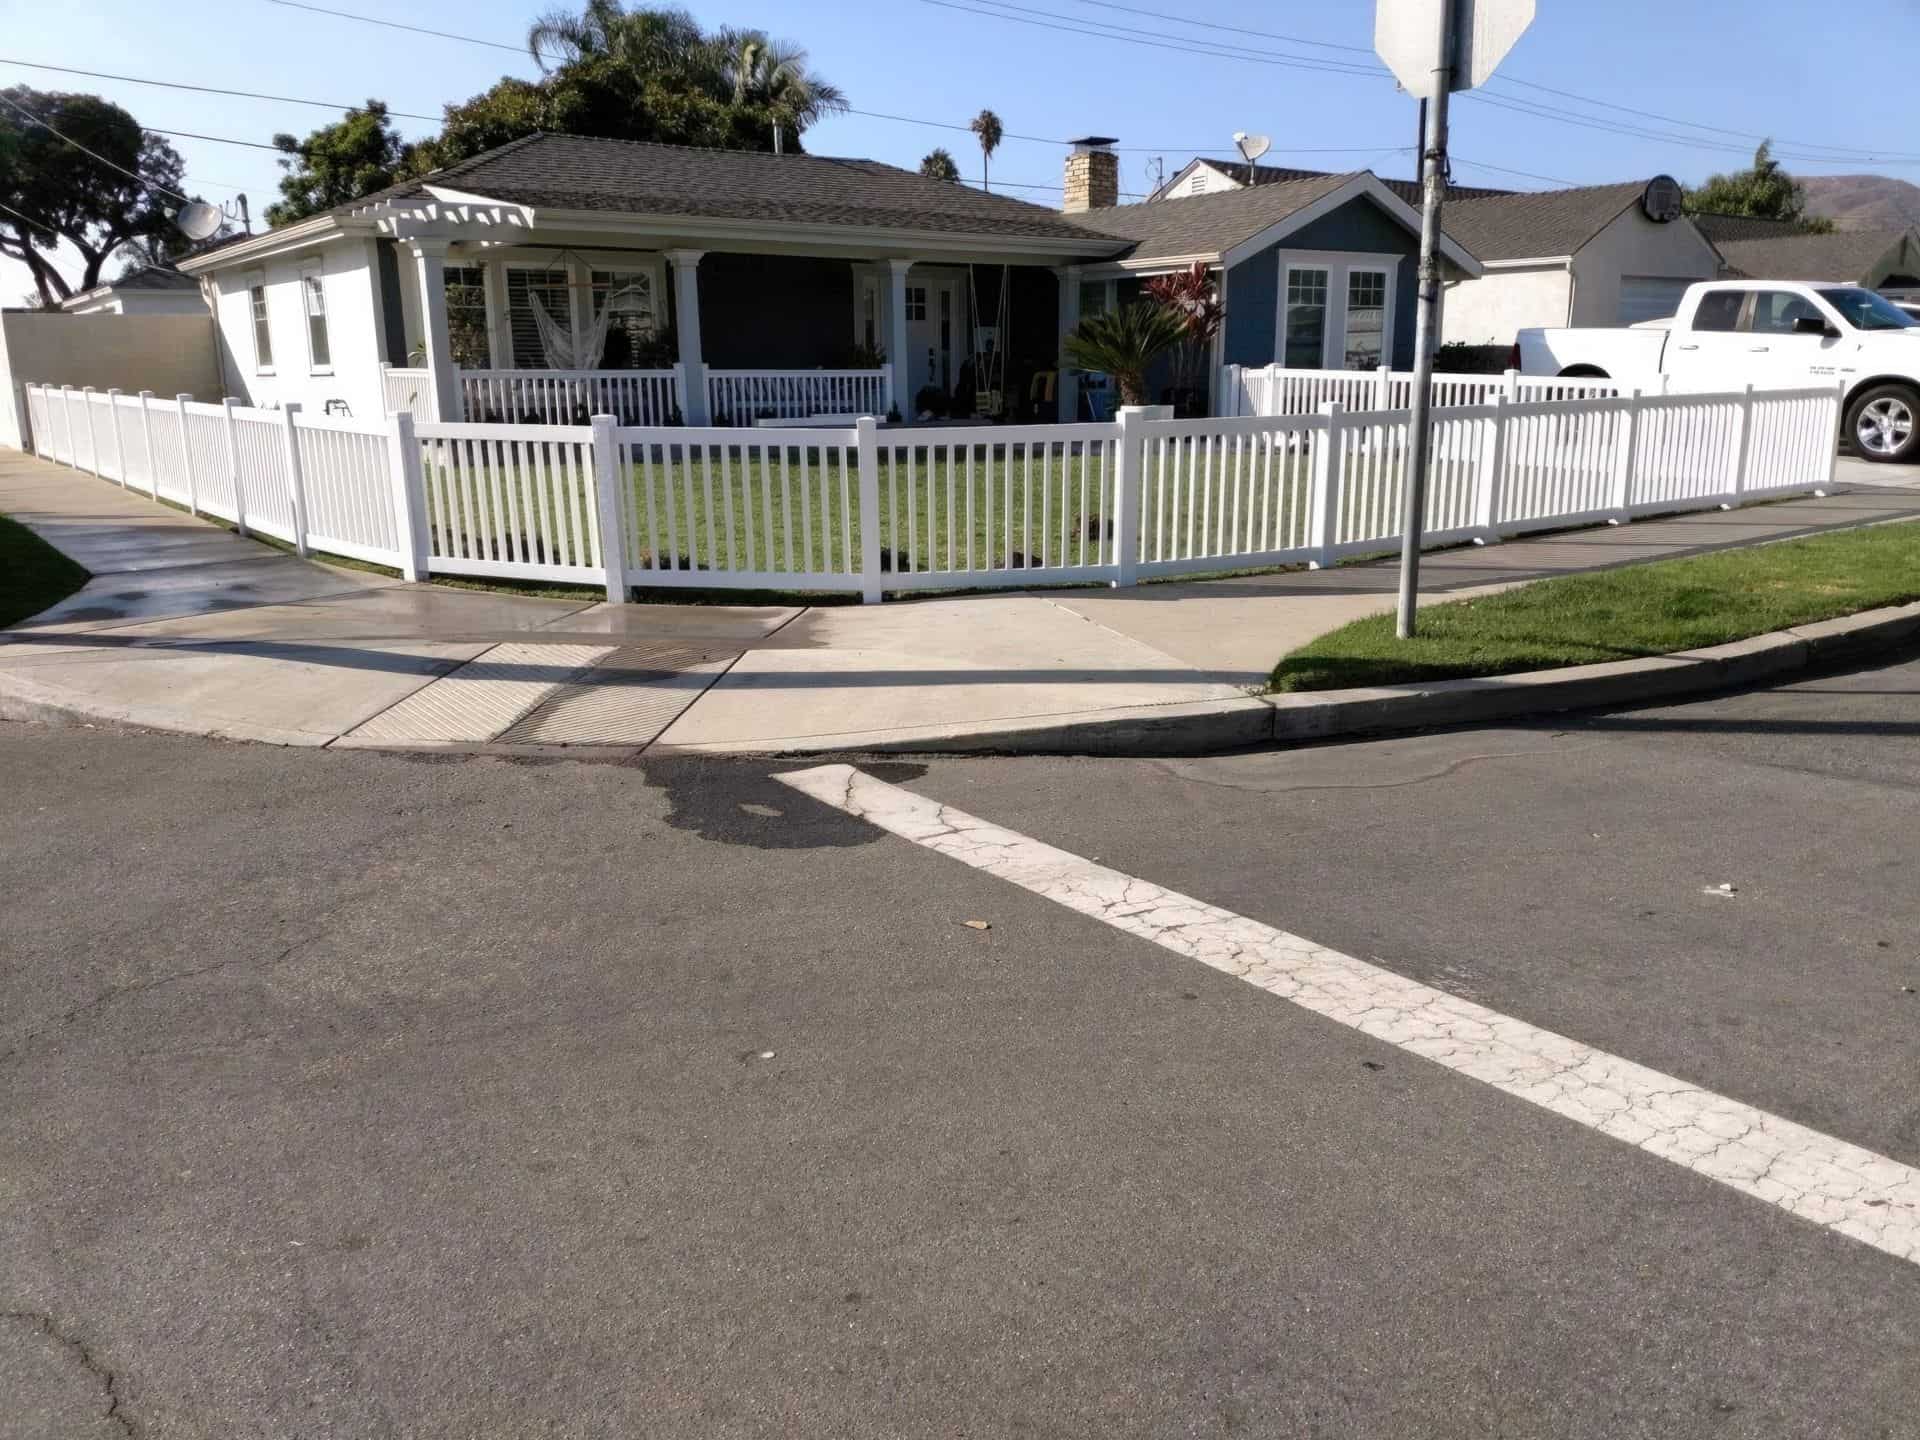 Suburban house with vinyl closed-top picket fence, concrete driveway, sidewalk, and trees in the background.